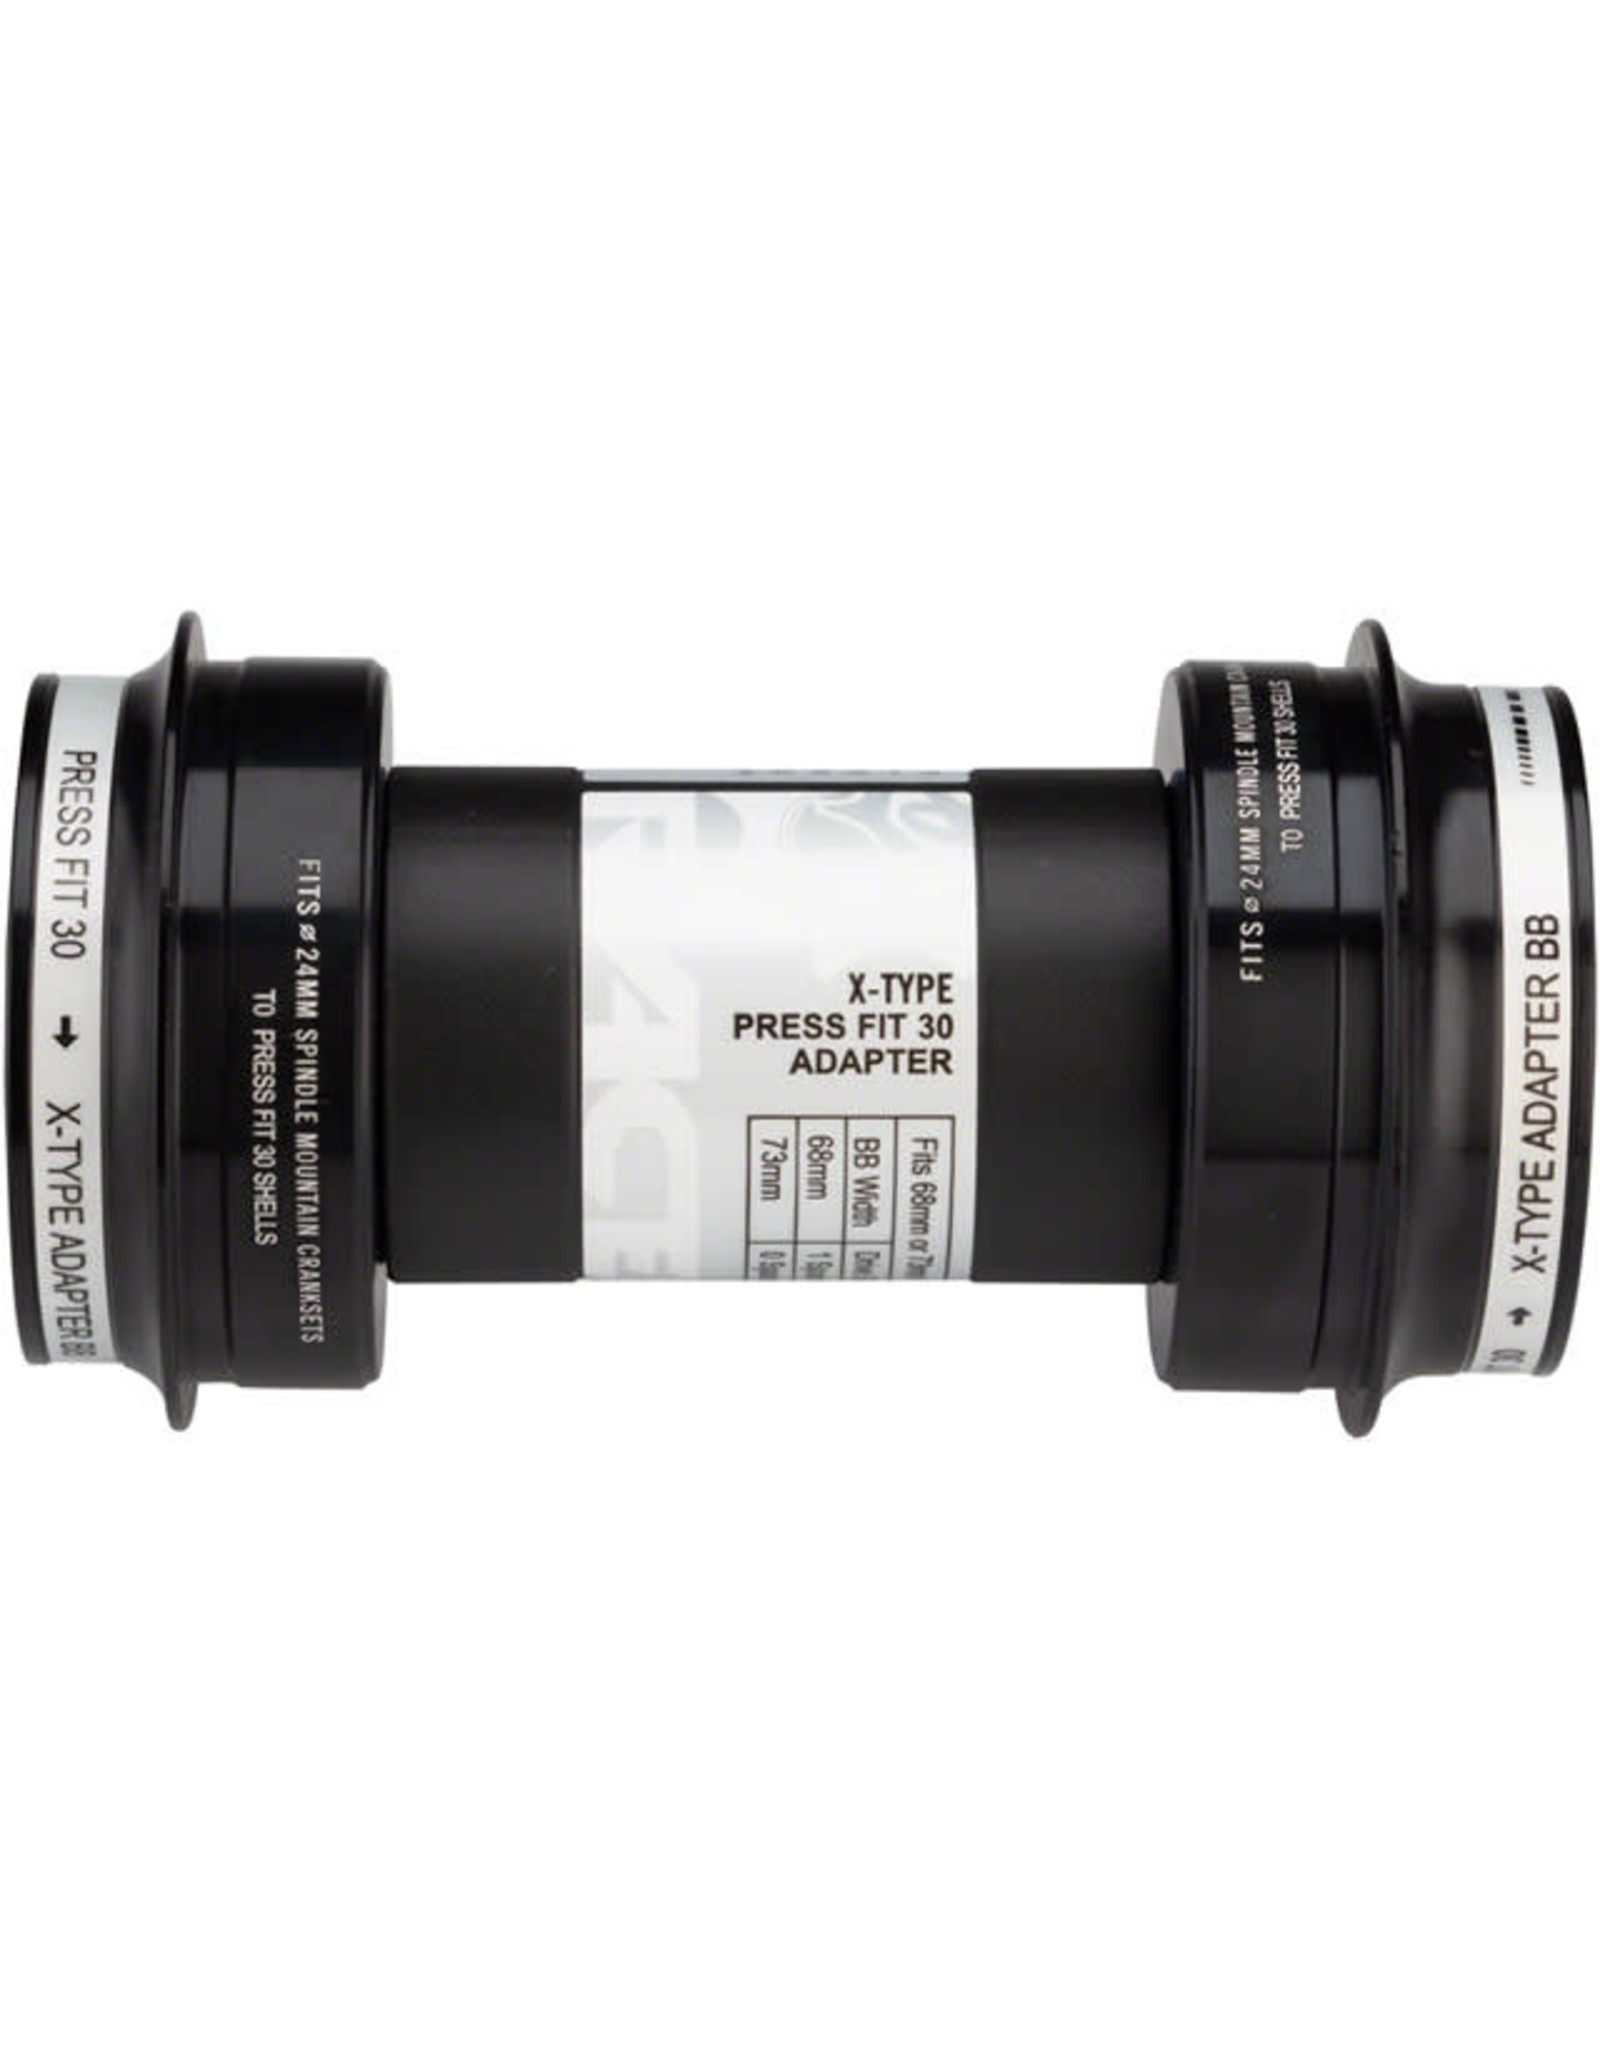 RaceFace RaceFace EXI PF30 Bottom Bracket: 46mm ID x 73mm Shell x 24mm Spindle (Works w/ Hollowtech)